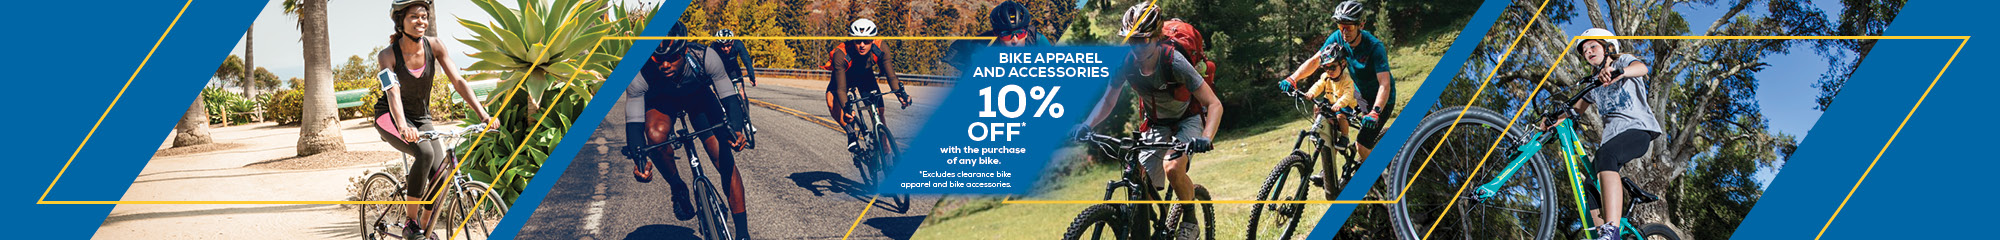 10% off cycling apparel and accessories with the purchase of any bike.  Excludes sale and clearance items.